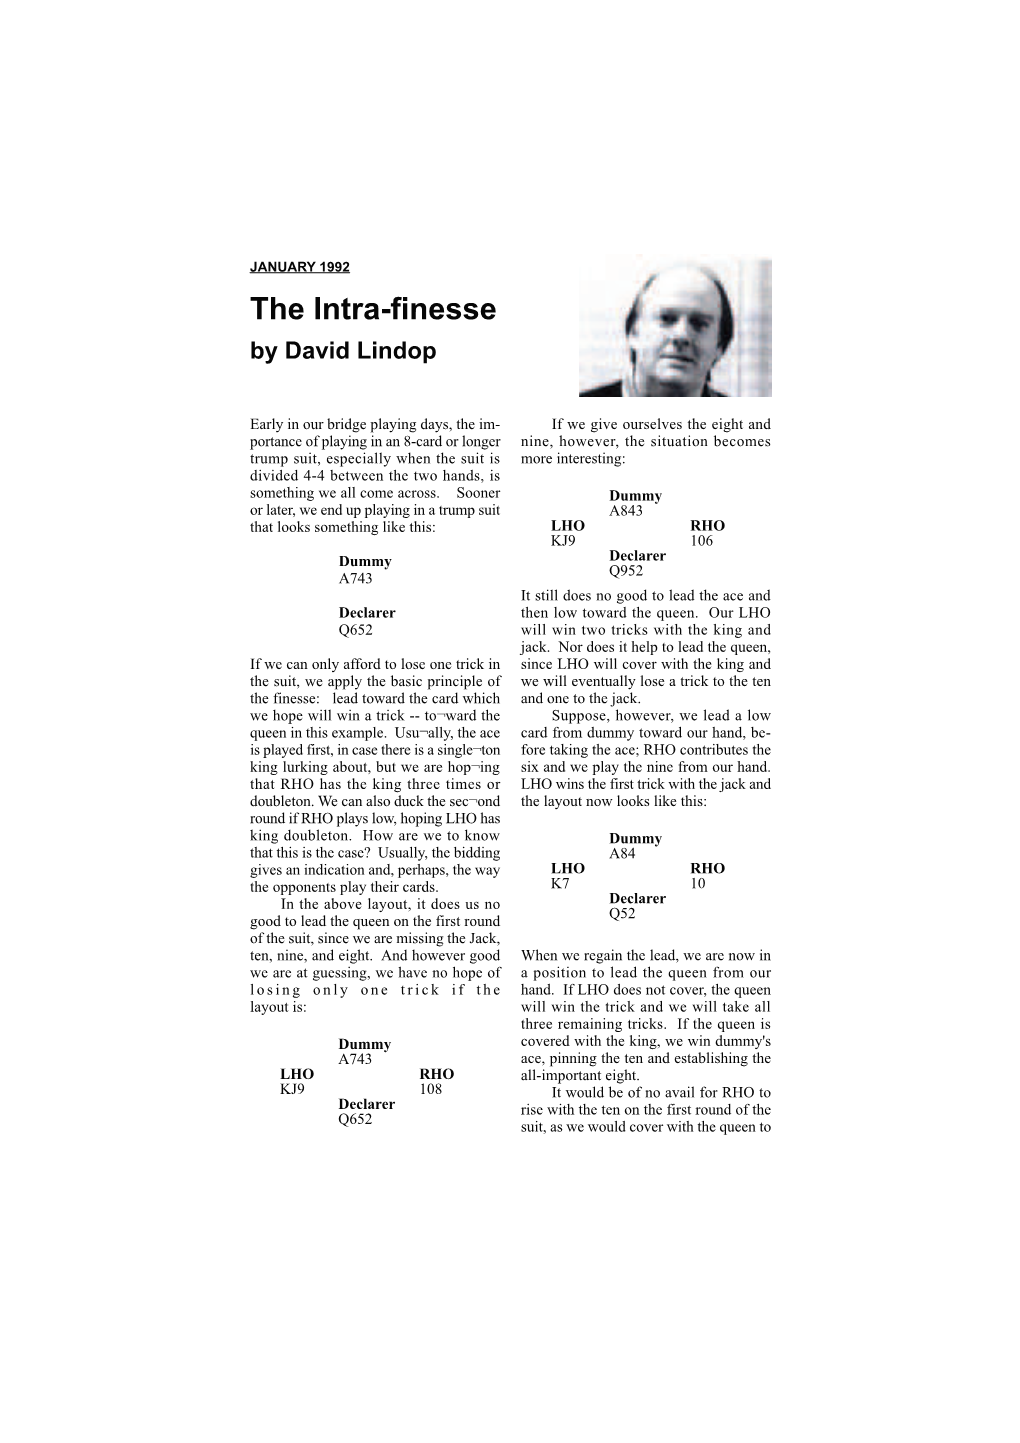 The Intra-Finesse by David Lindop